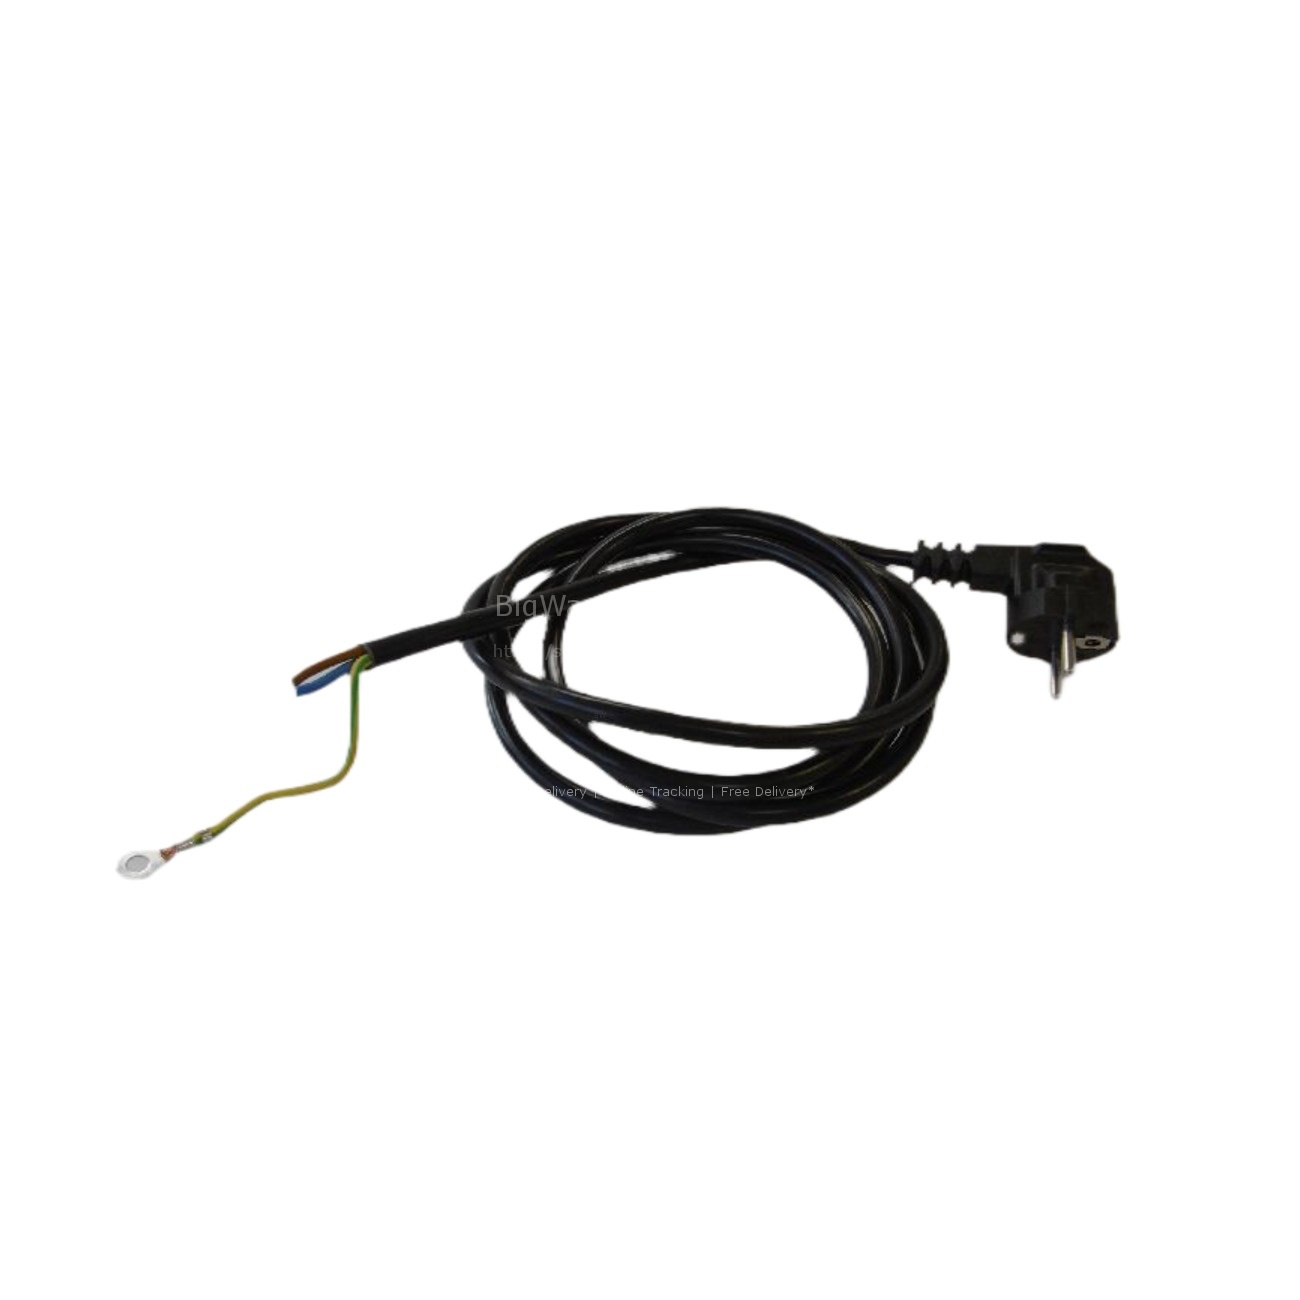 POWER SUPPLY CABLE 3x1.5mmq 2000mm